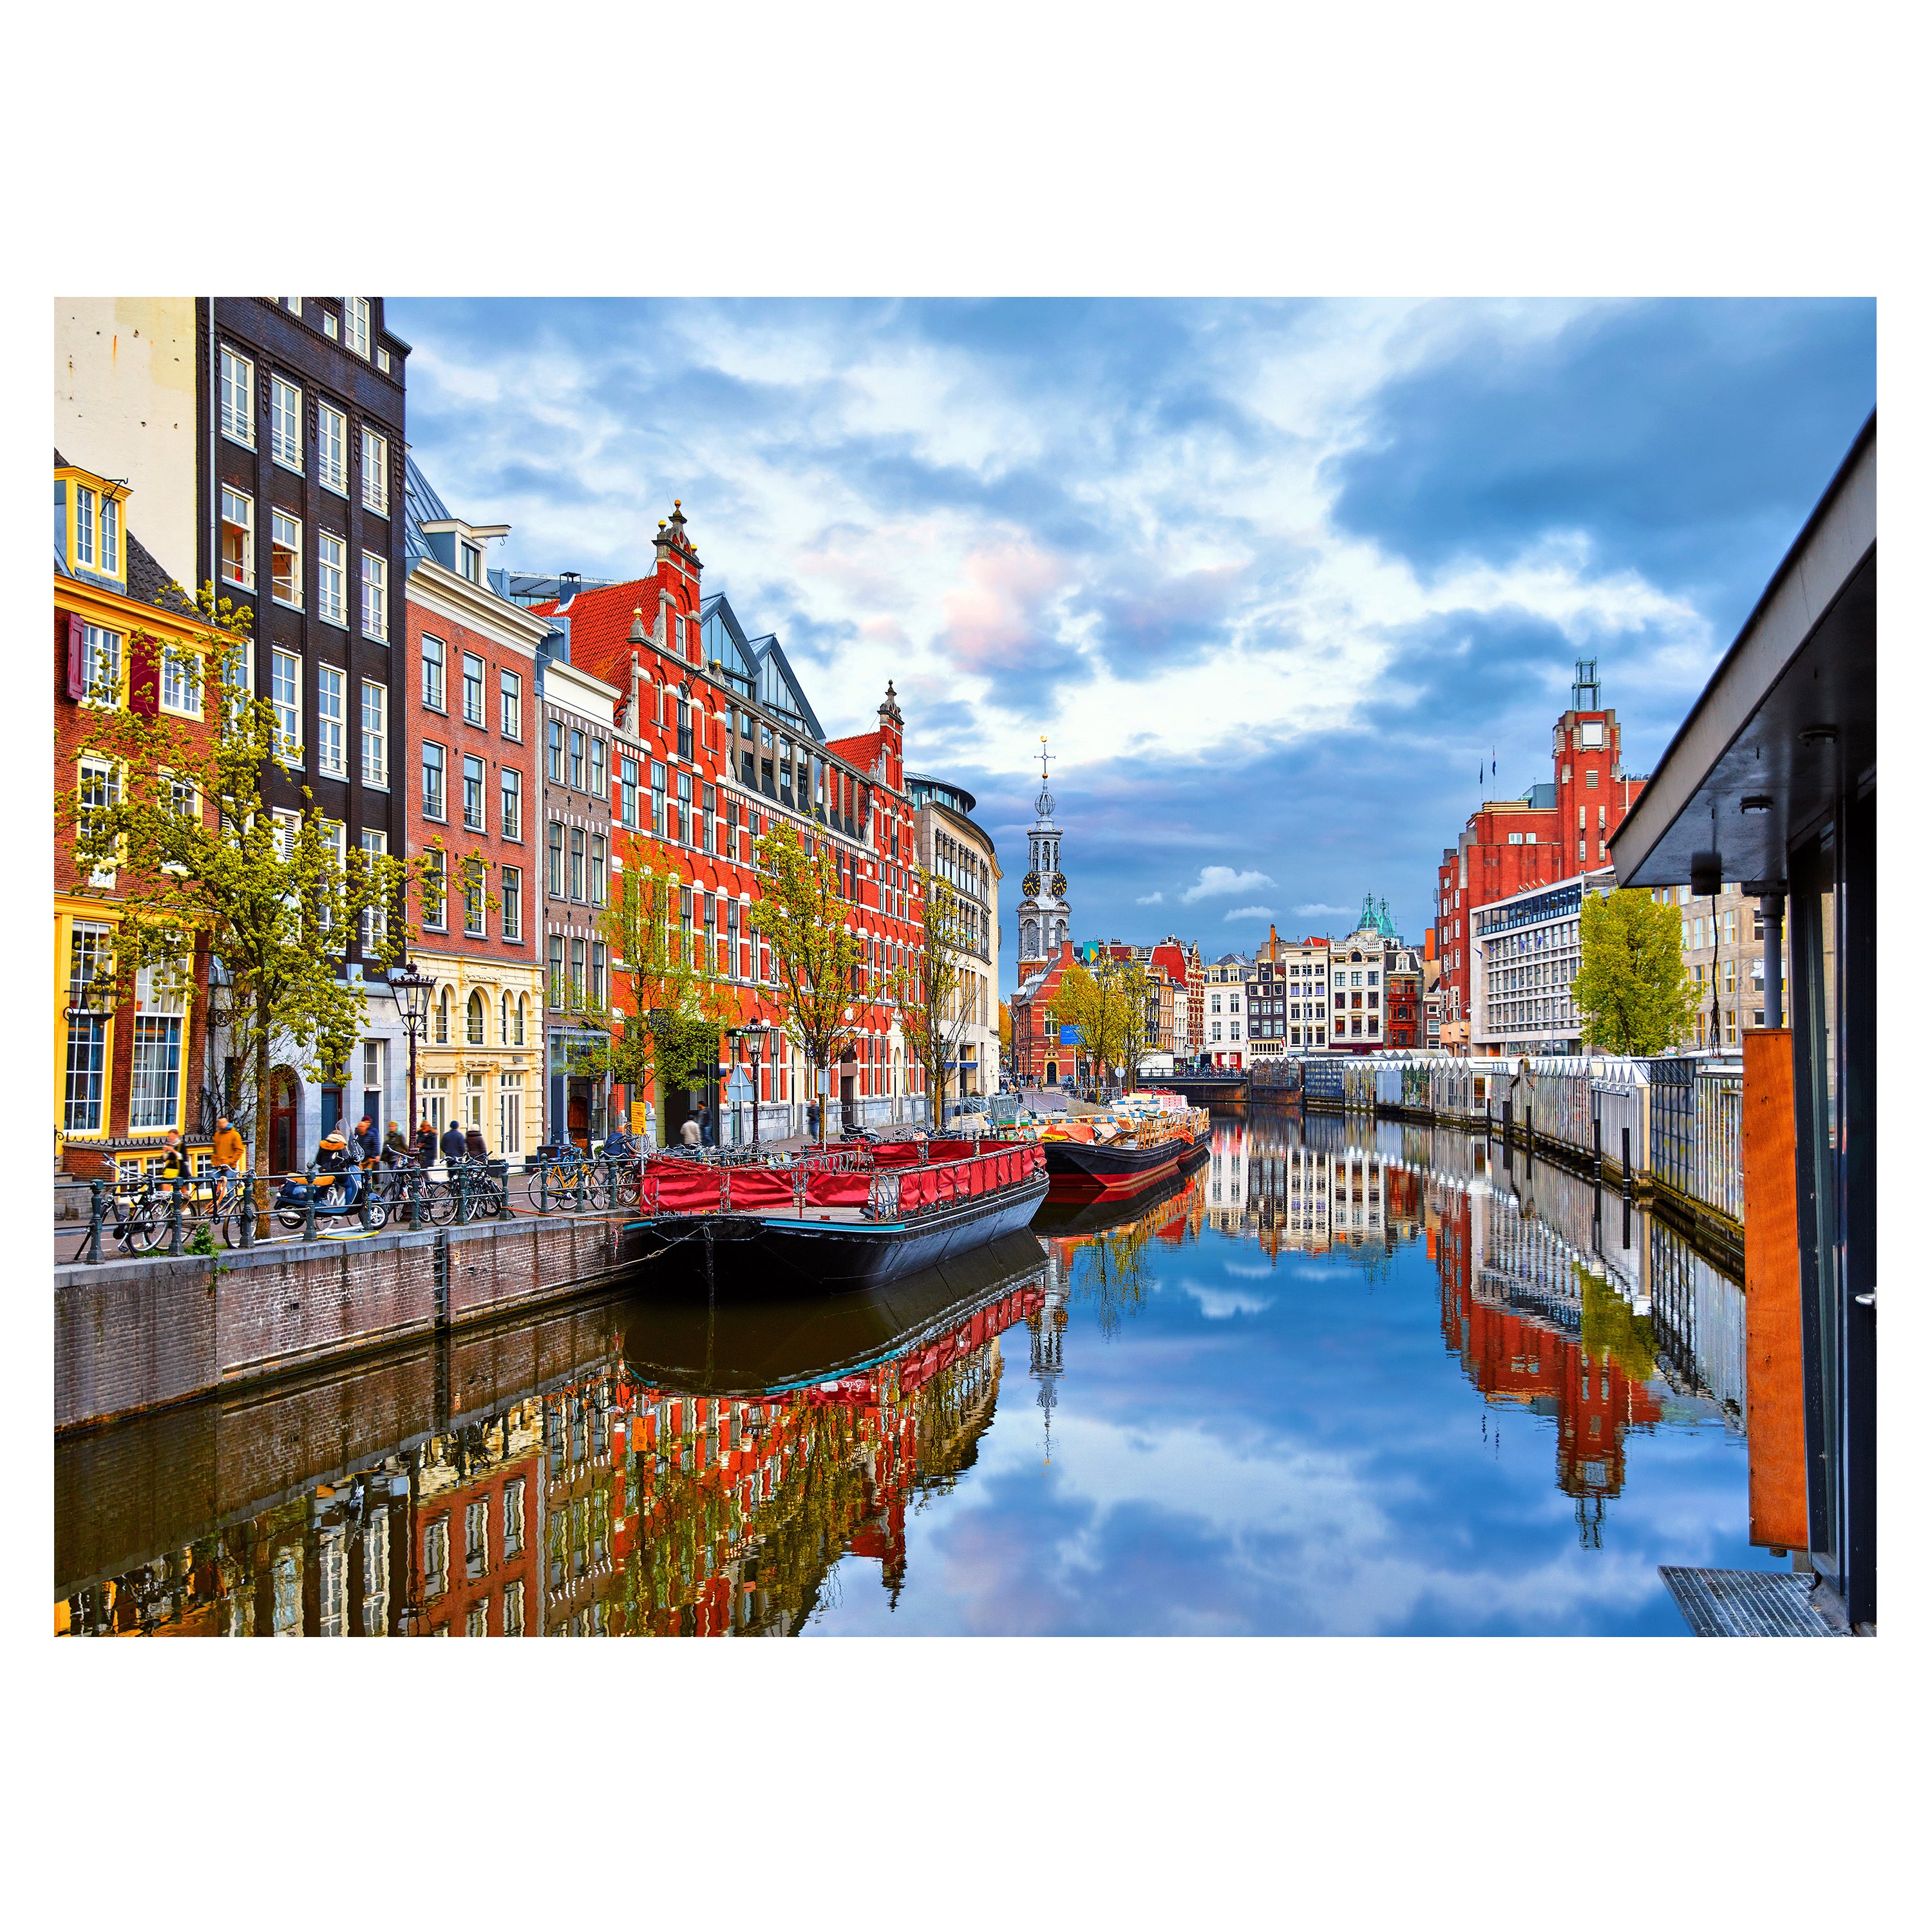 Jigsaw Puzzle Amstel River, Holland 500 piece